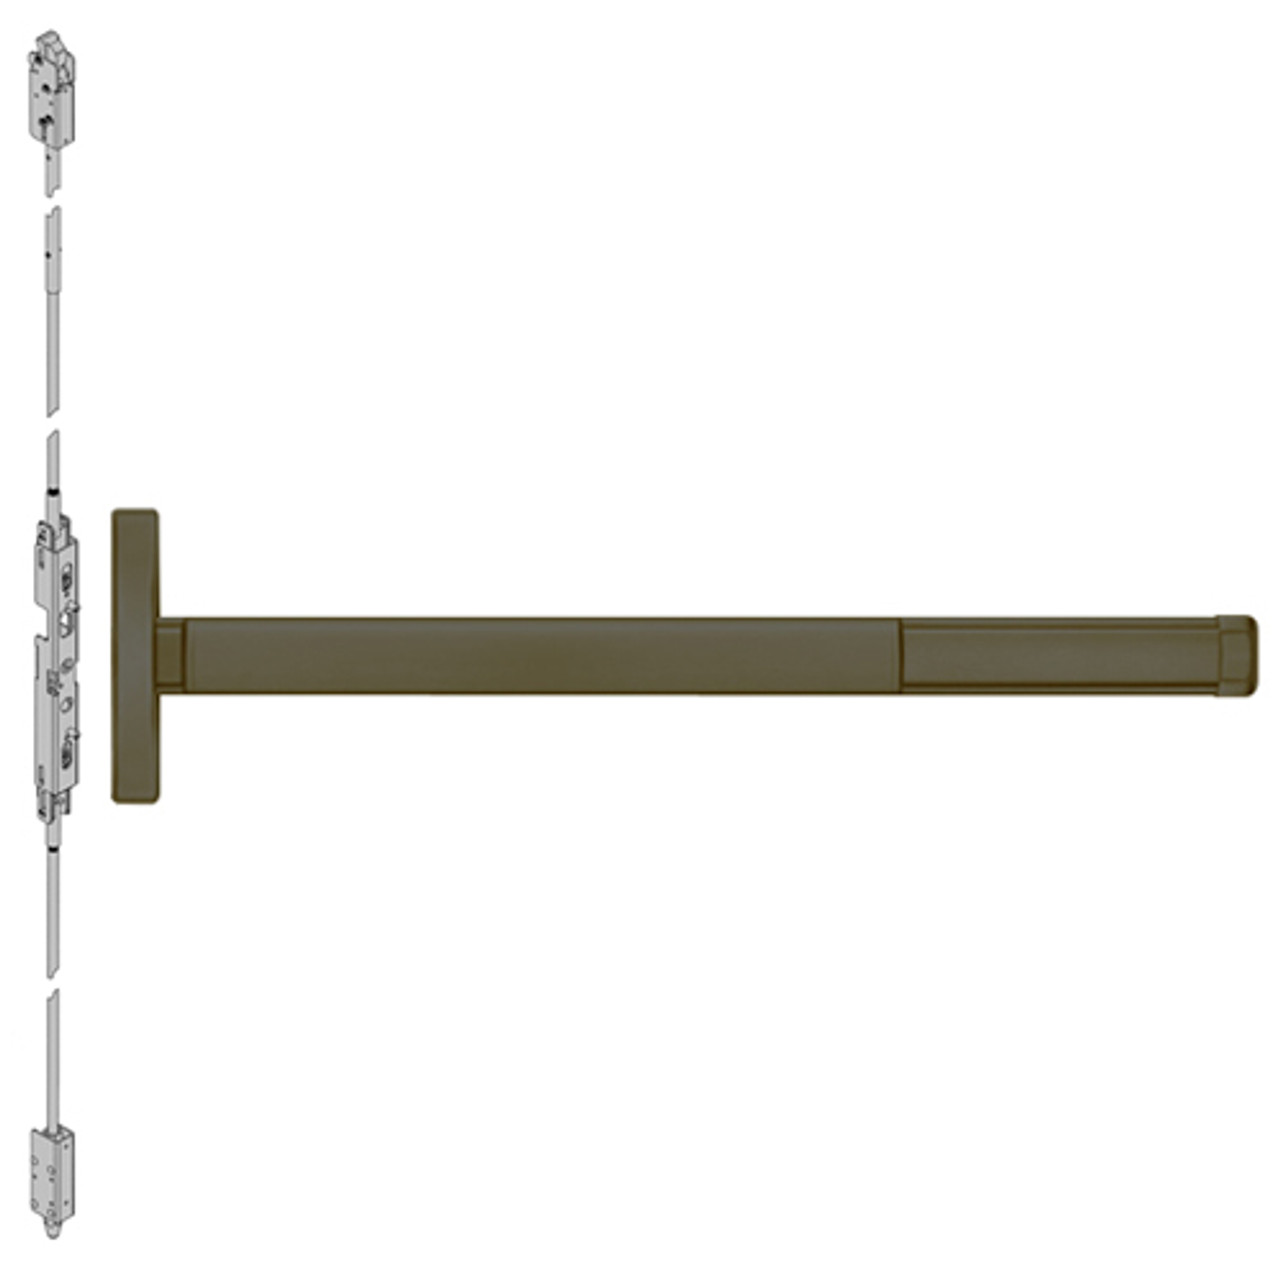 DE2614LBR-613-48 PHI 2600 Series Concealed Vertical Rod Exit Device with Delayed Egress Prepped for Lever Always Active in Oil Rubbed Bronze Finish